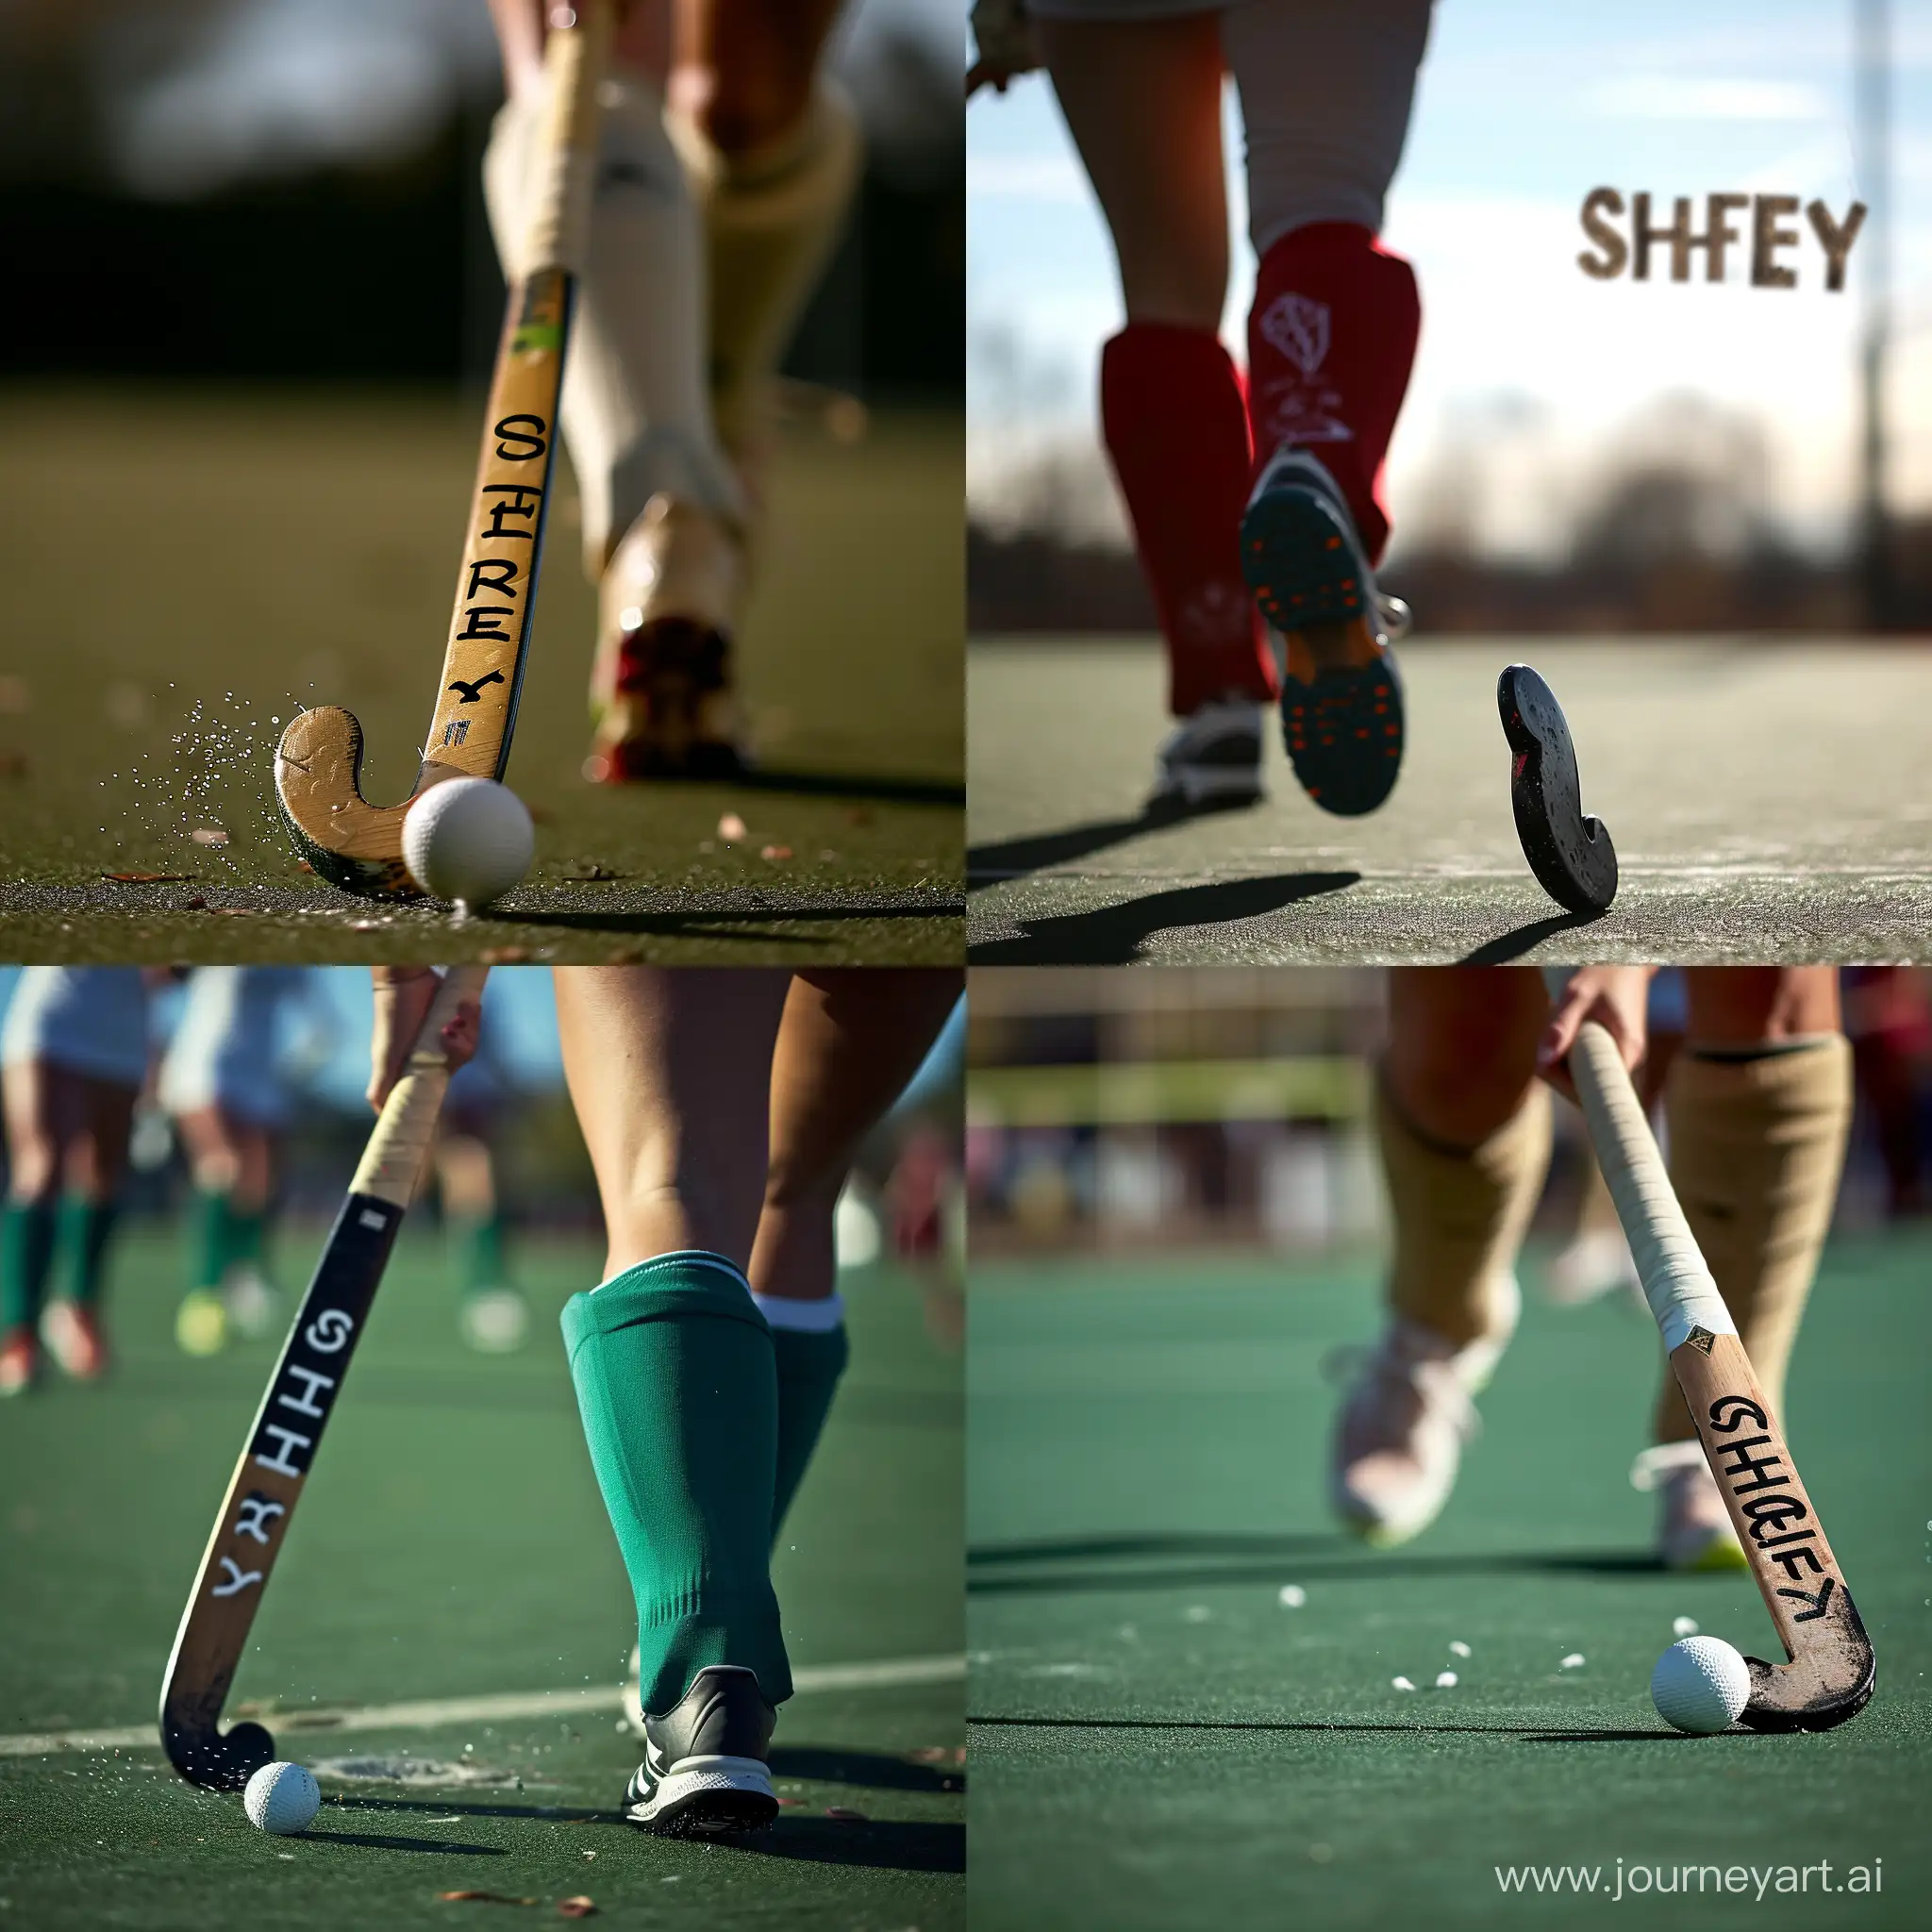 Field-Hockey-Player-Celebrating-Victory-with-Personalized-Stick